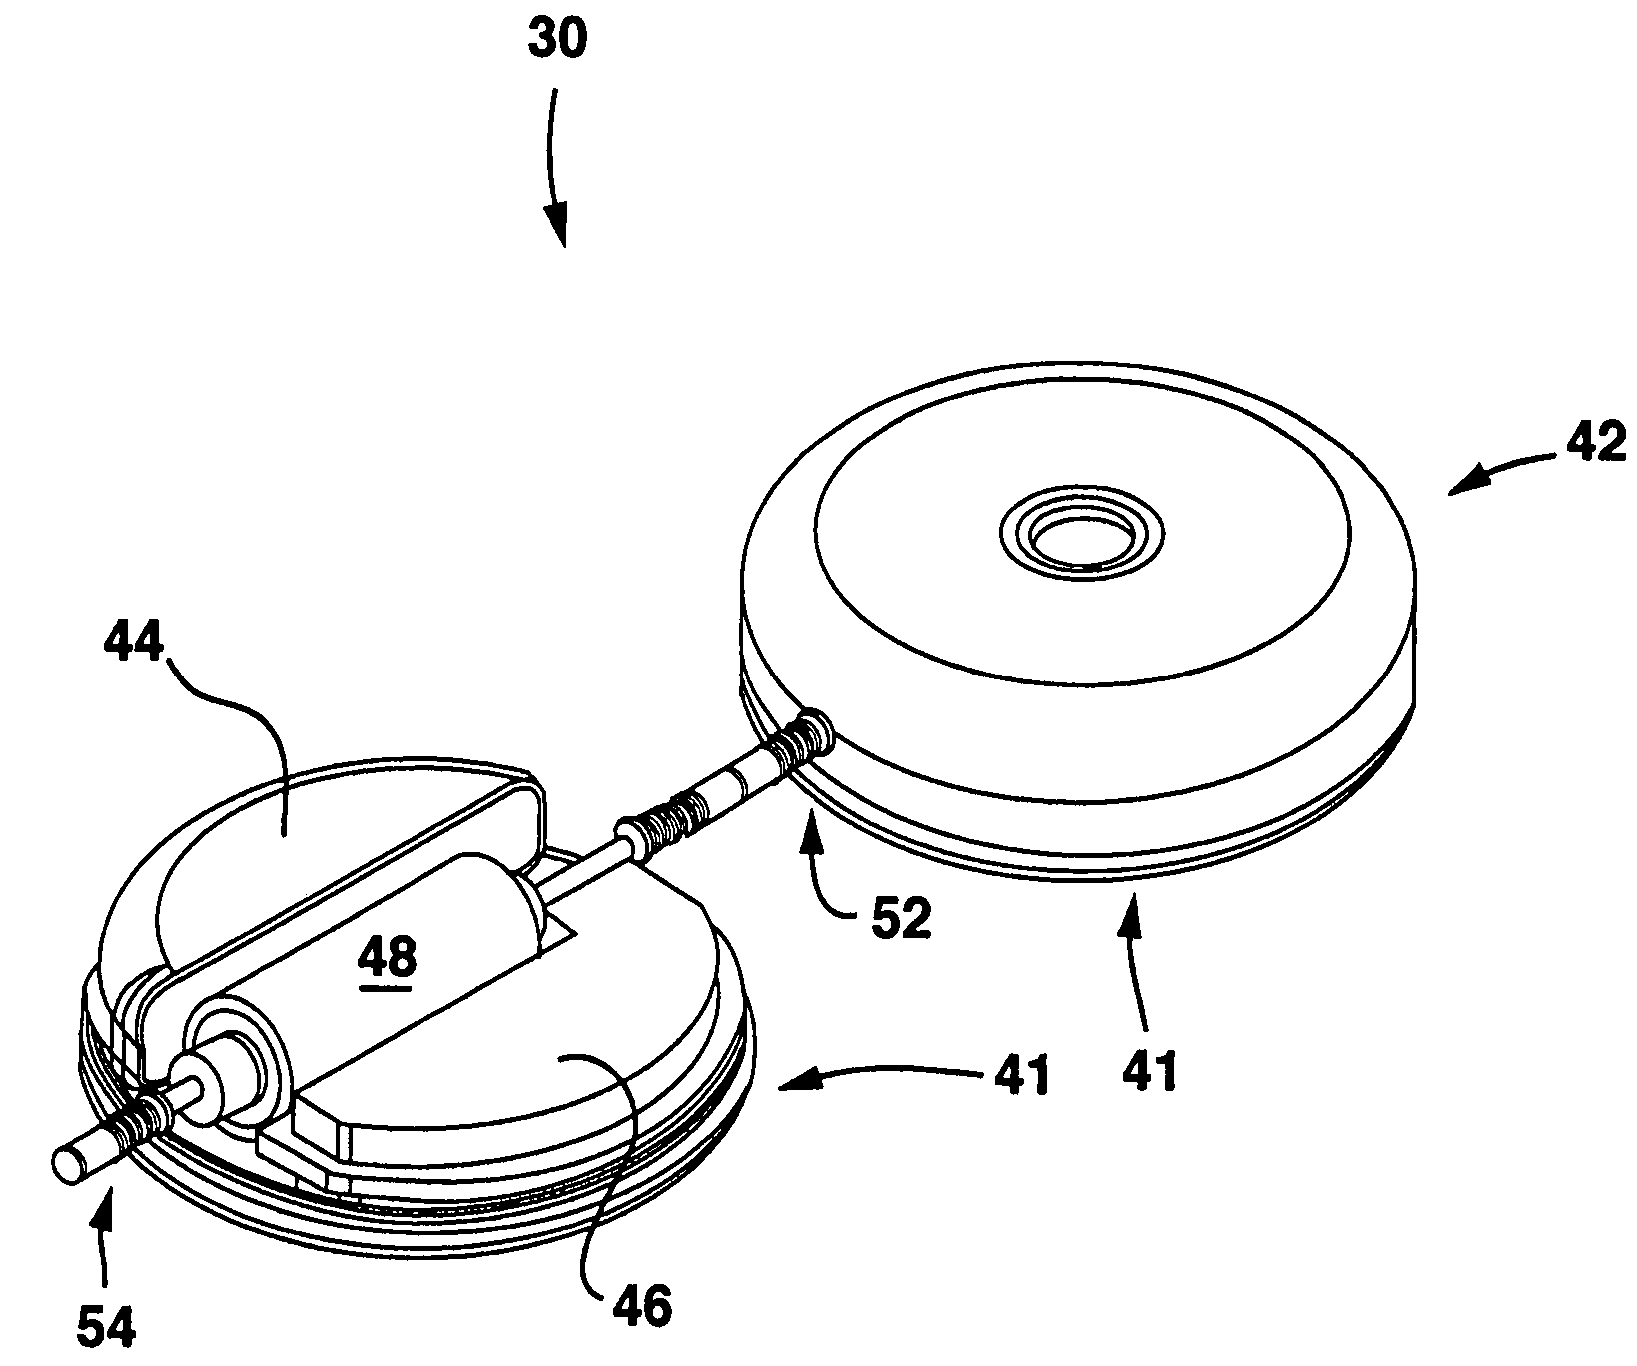 Implantable therapeutic substance delivery device